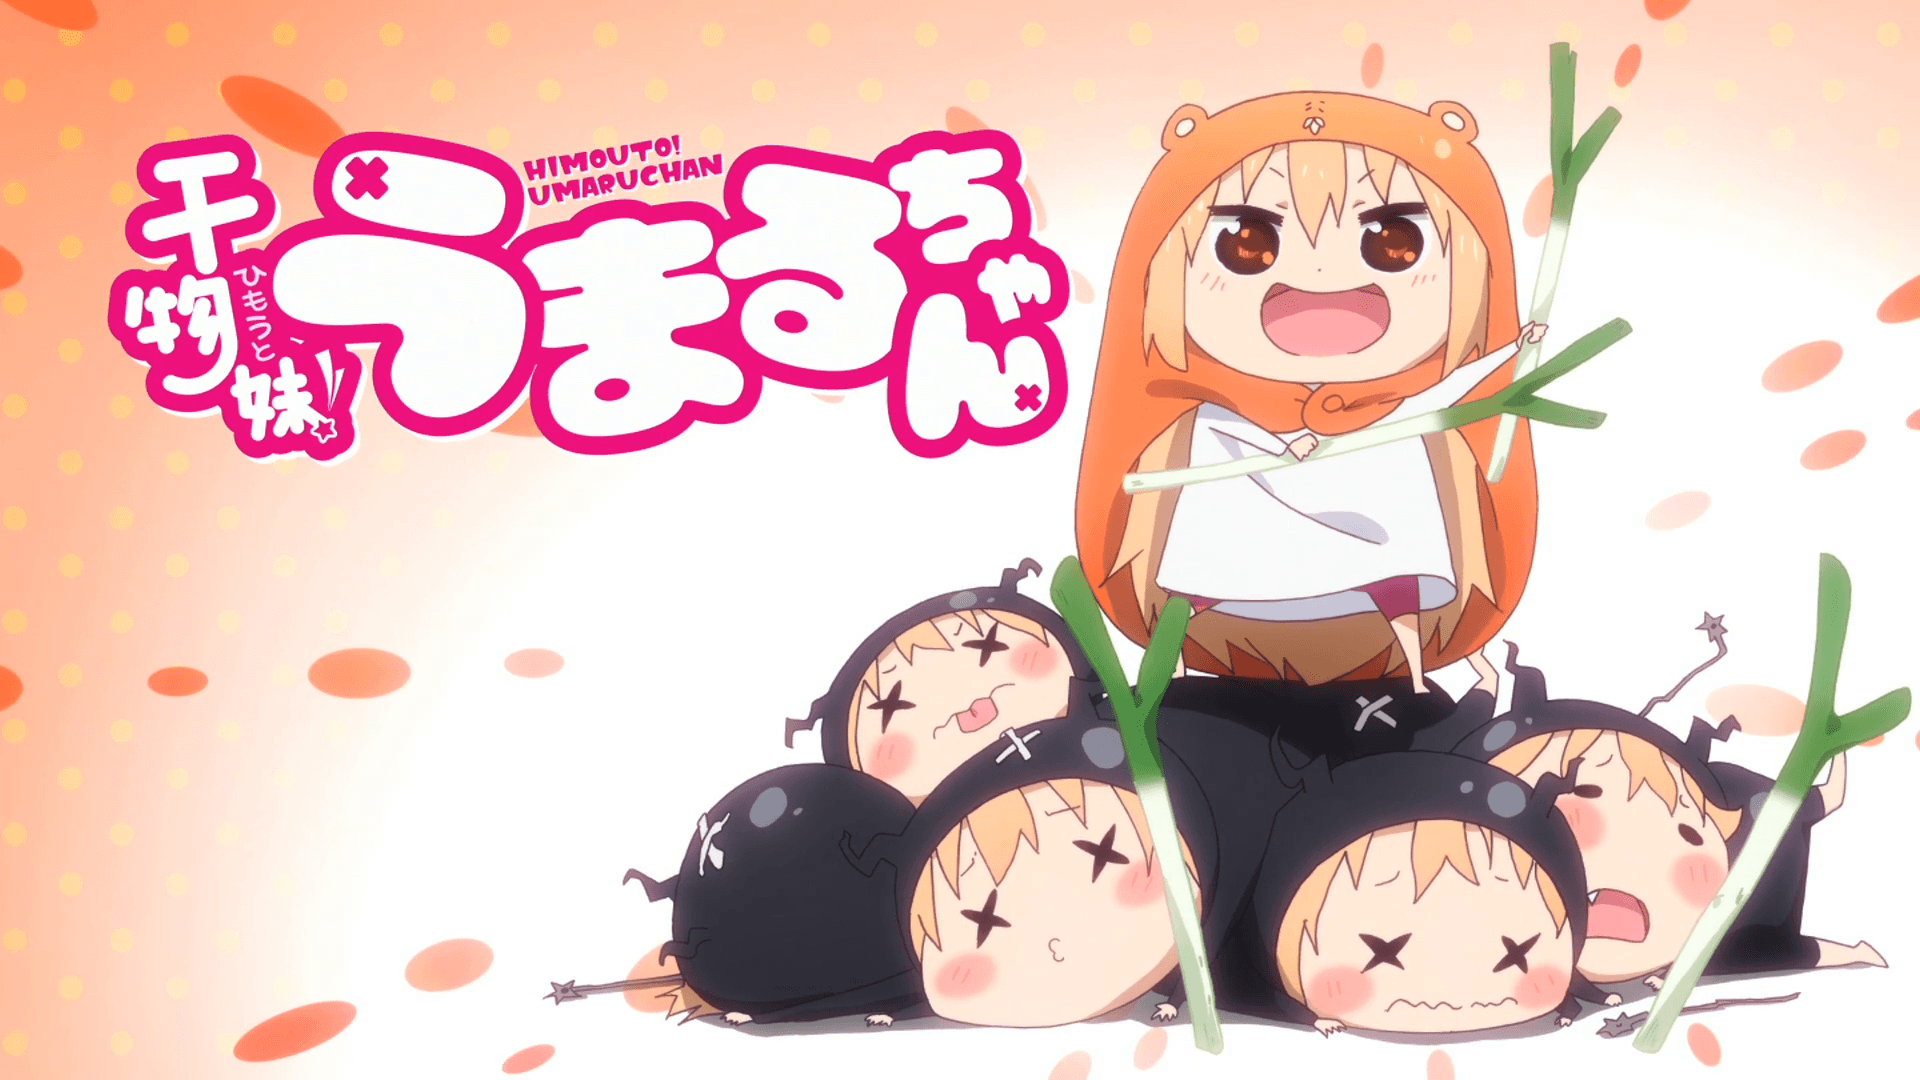 Spoilers] Himouto! Umaru Chan 10 [Discussion]